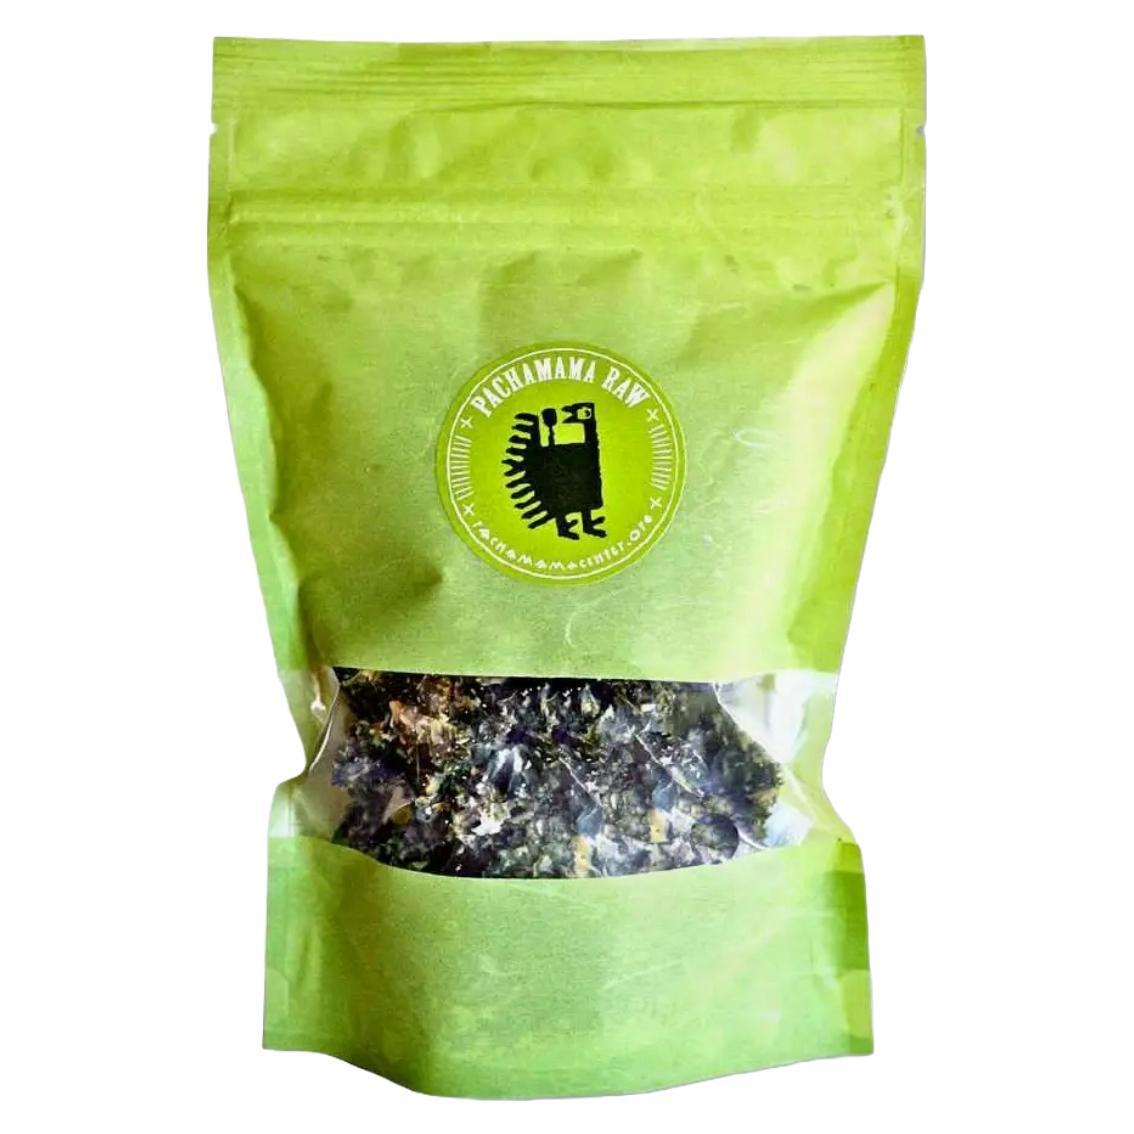 Pachamama Raw - 'Original' Kale Chips (2.5OZ) - The Epicurean Trader